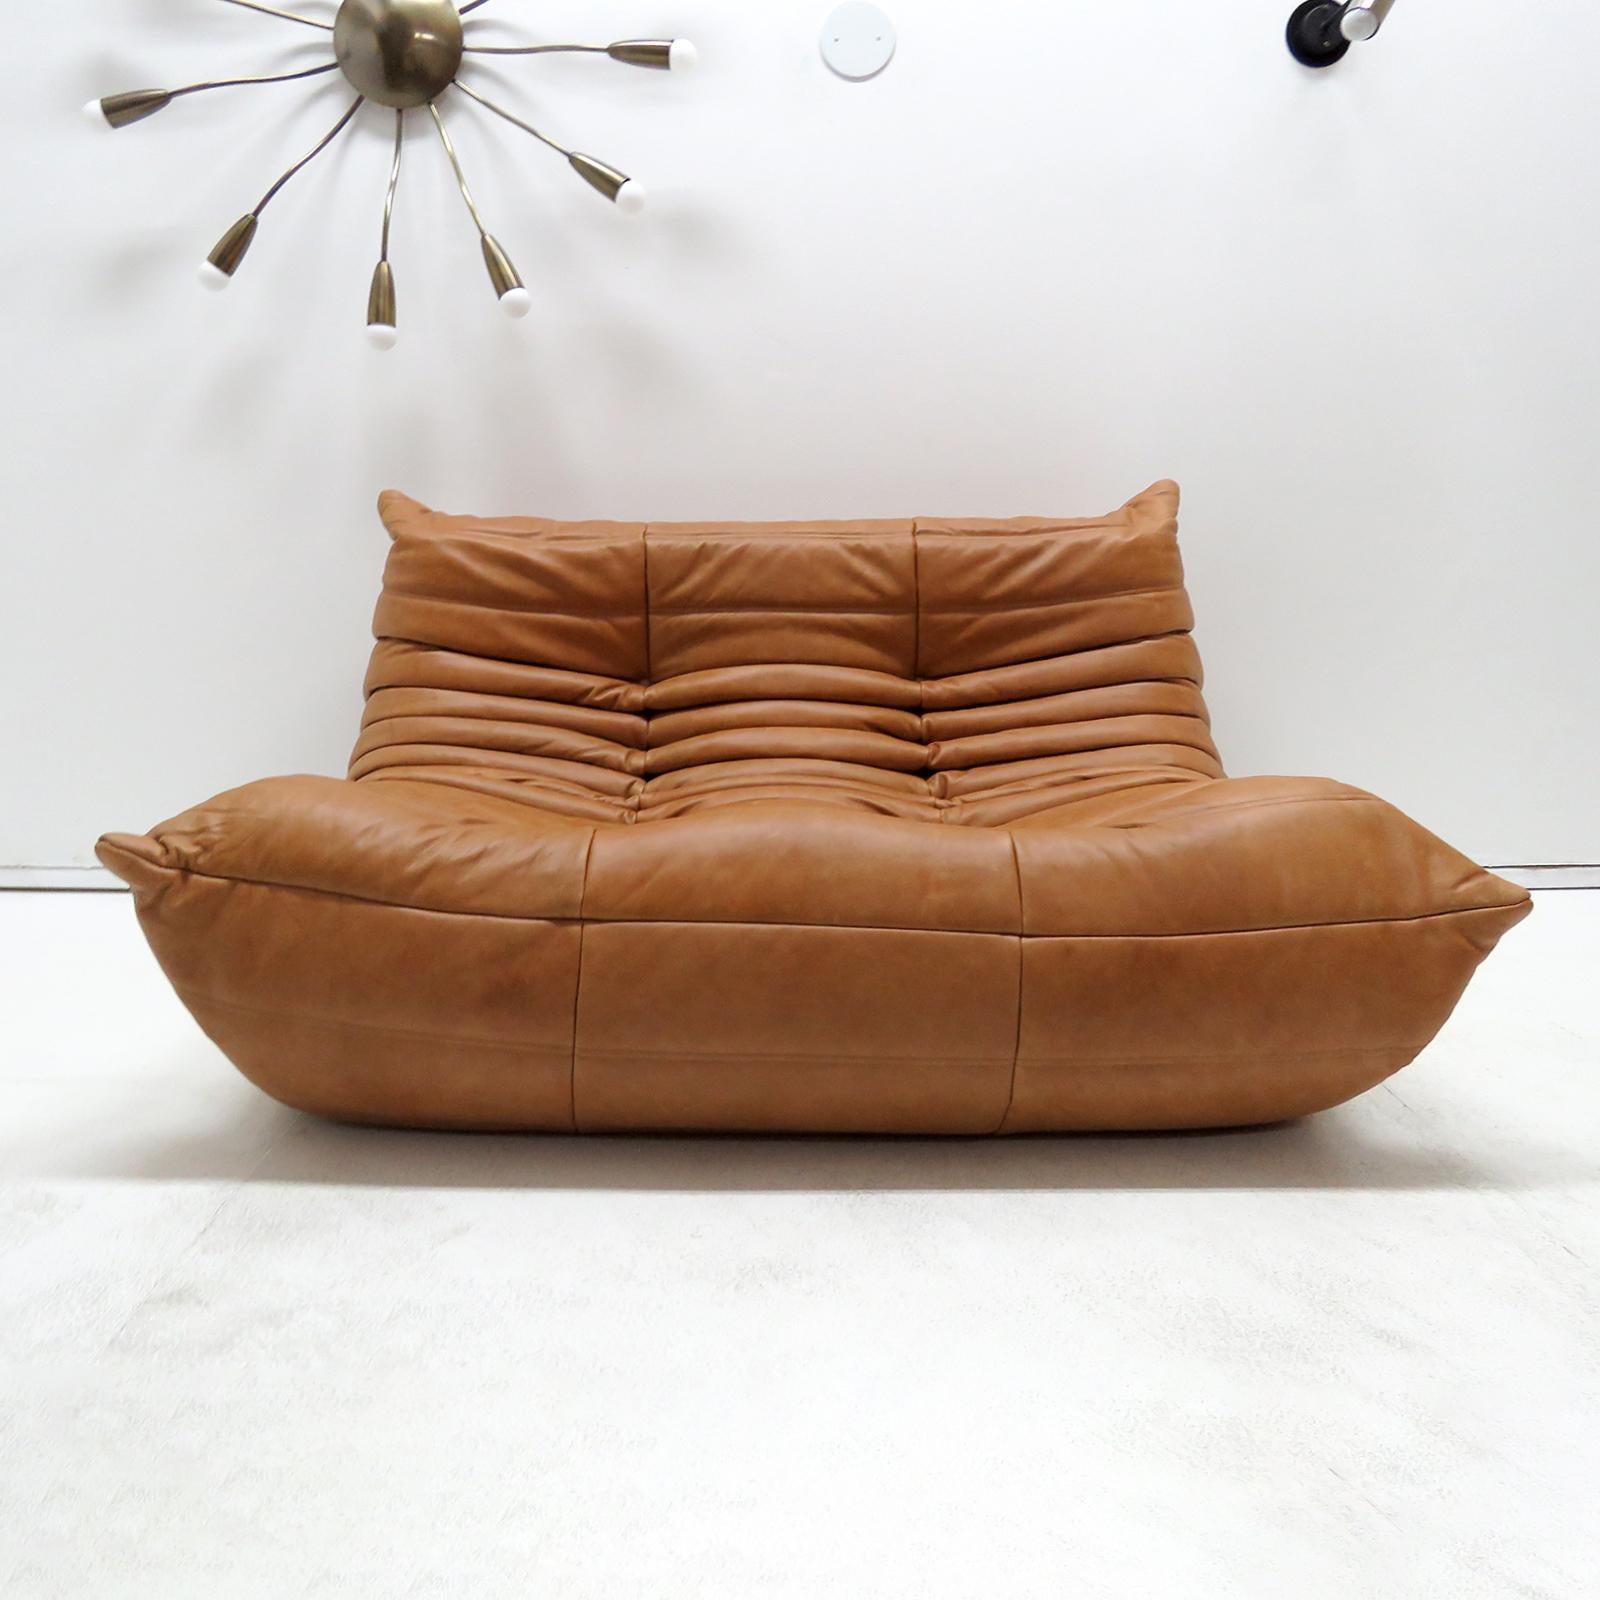 Stunning cognac colored aniline leather two-seater from the 